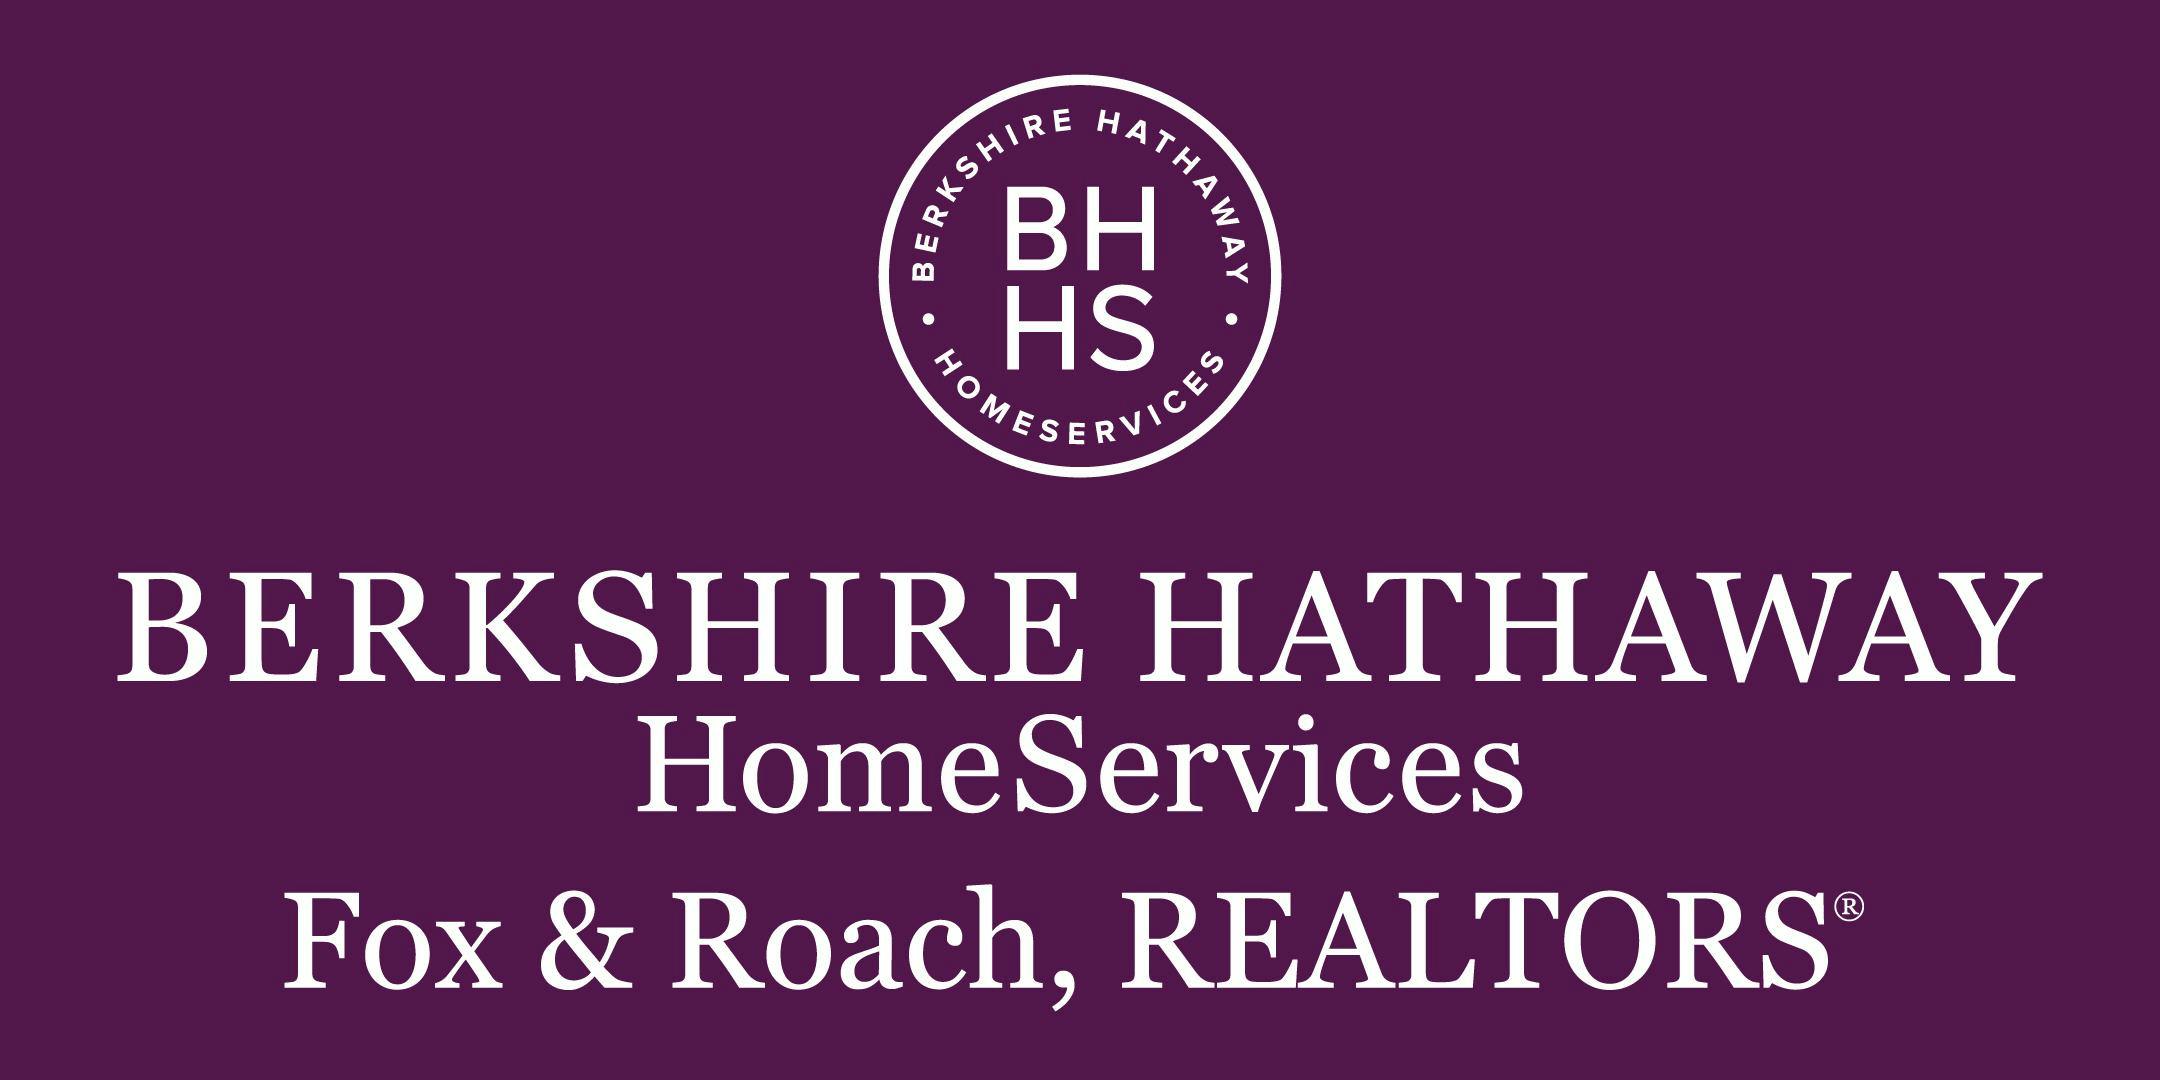 BEST New Agent Training, BHHS F&R Cherry Hill Corporate Hdqtrs, Wednesday & Thursday afternoons. 13 Classes in 7 Weeks.